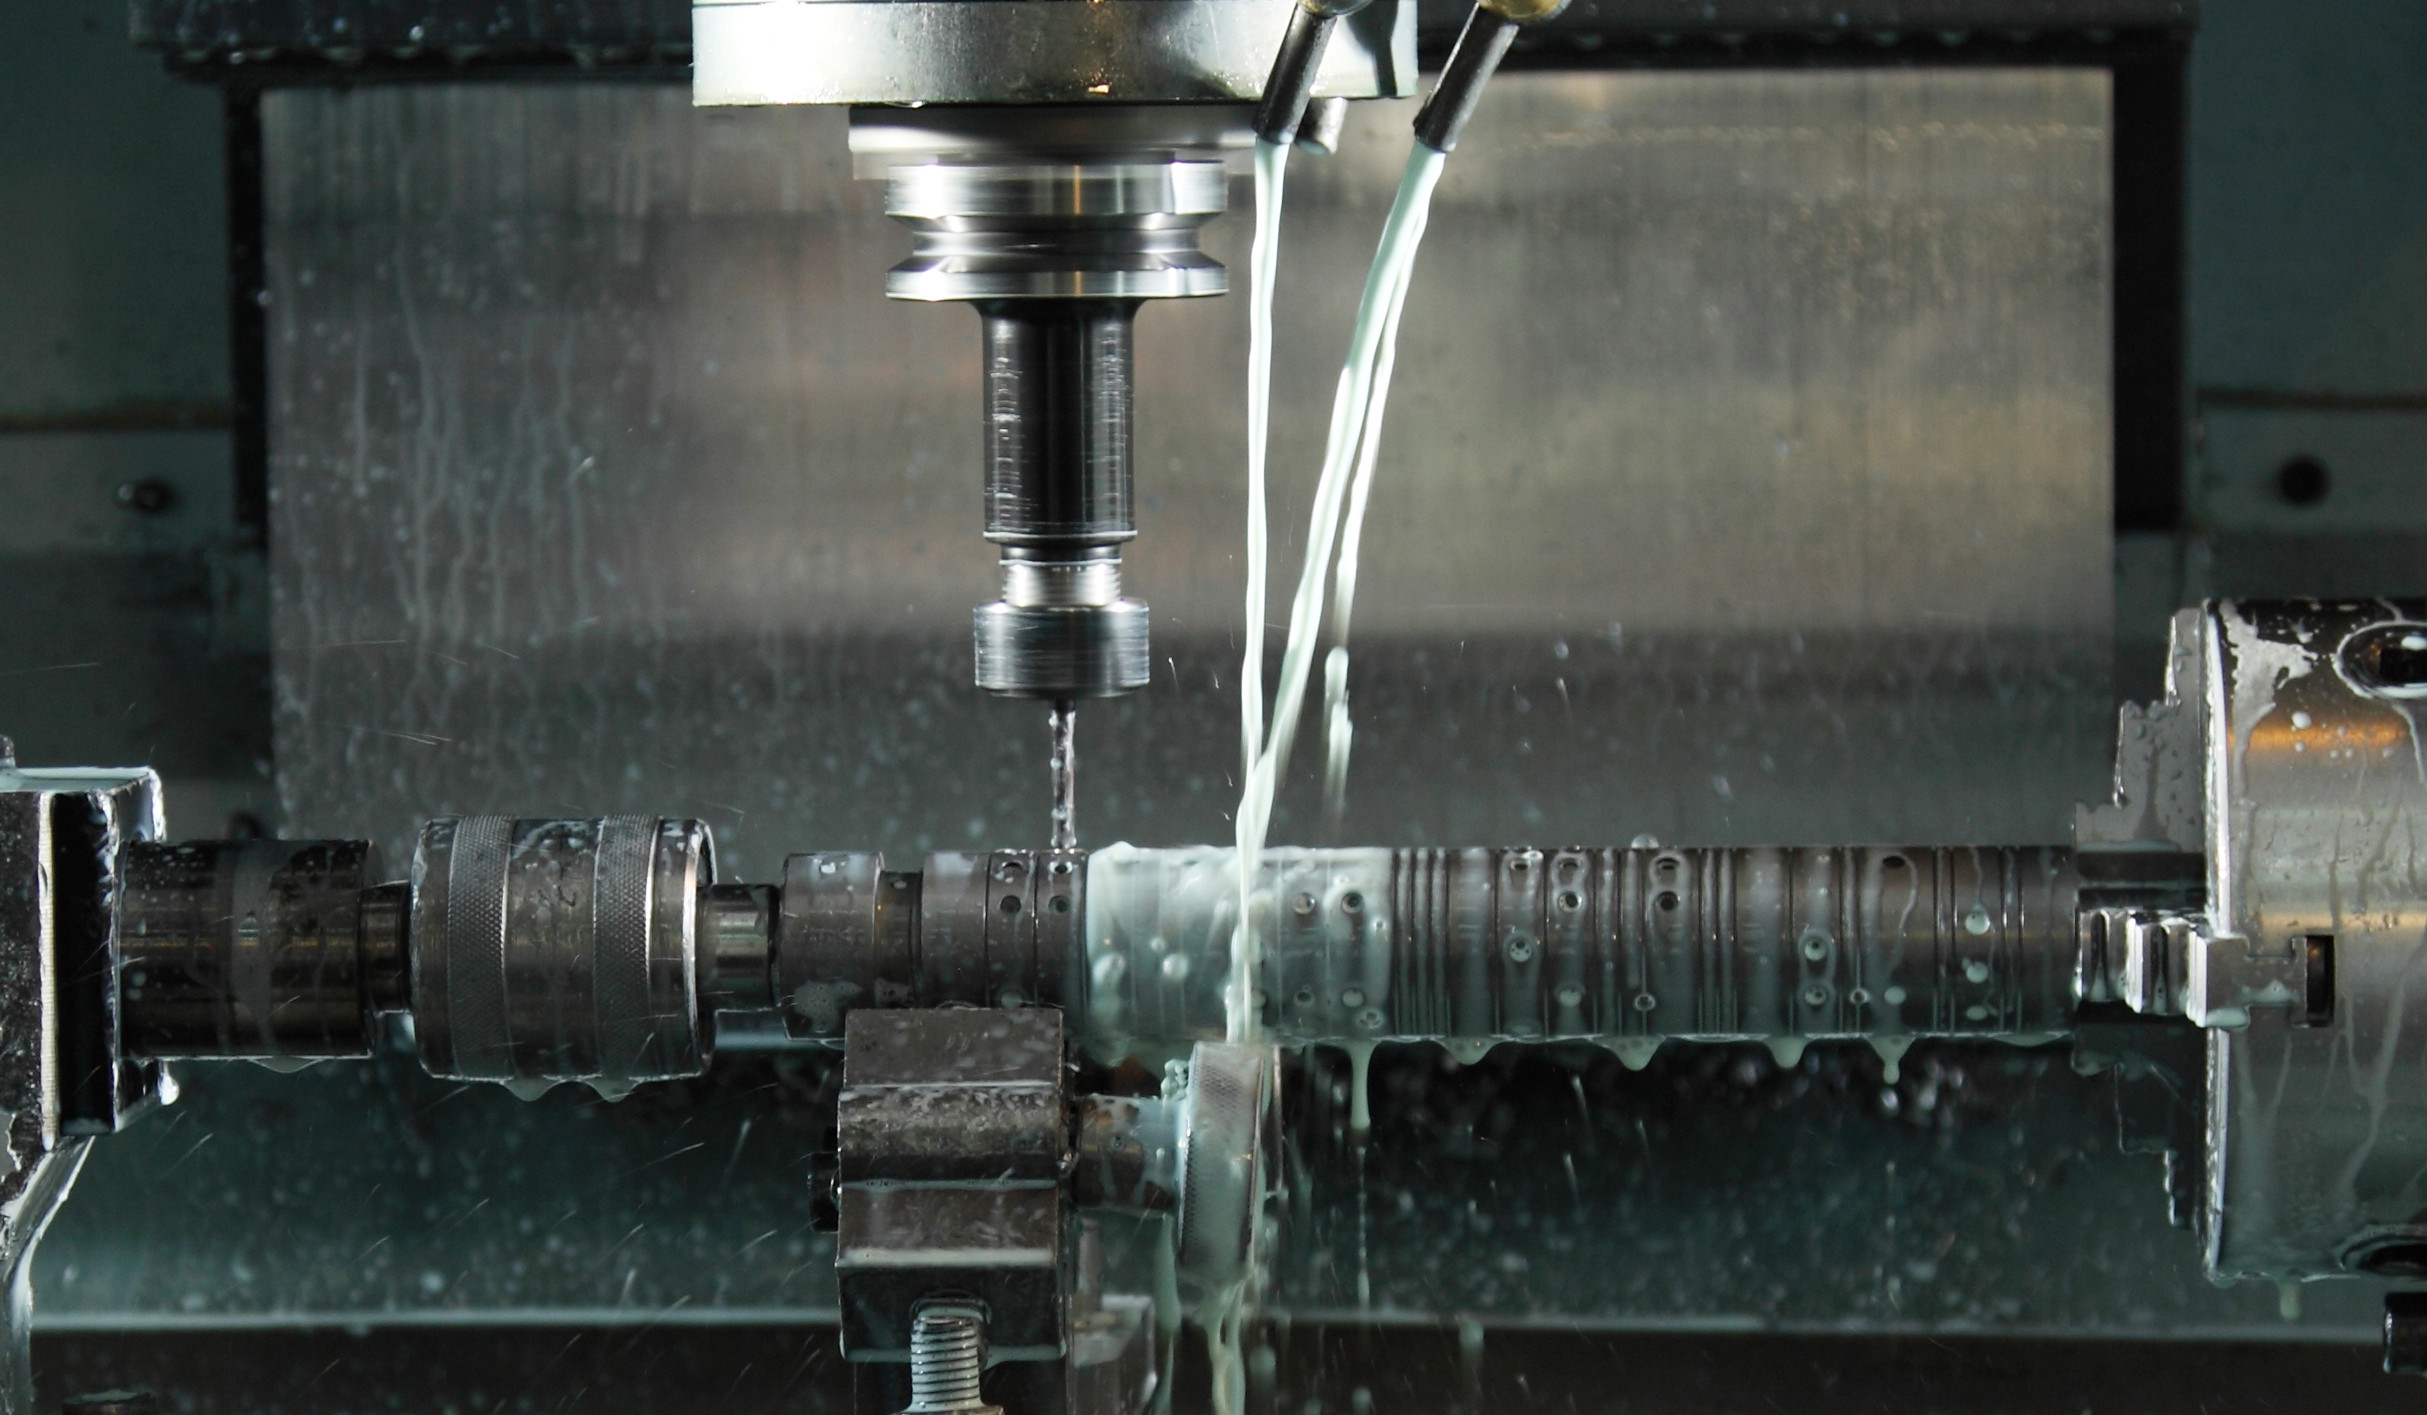 5 Ways the Right Cutting Fluid Helps Your Machines Perform Better